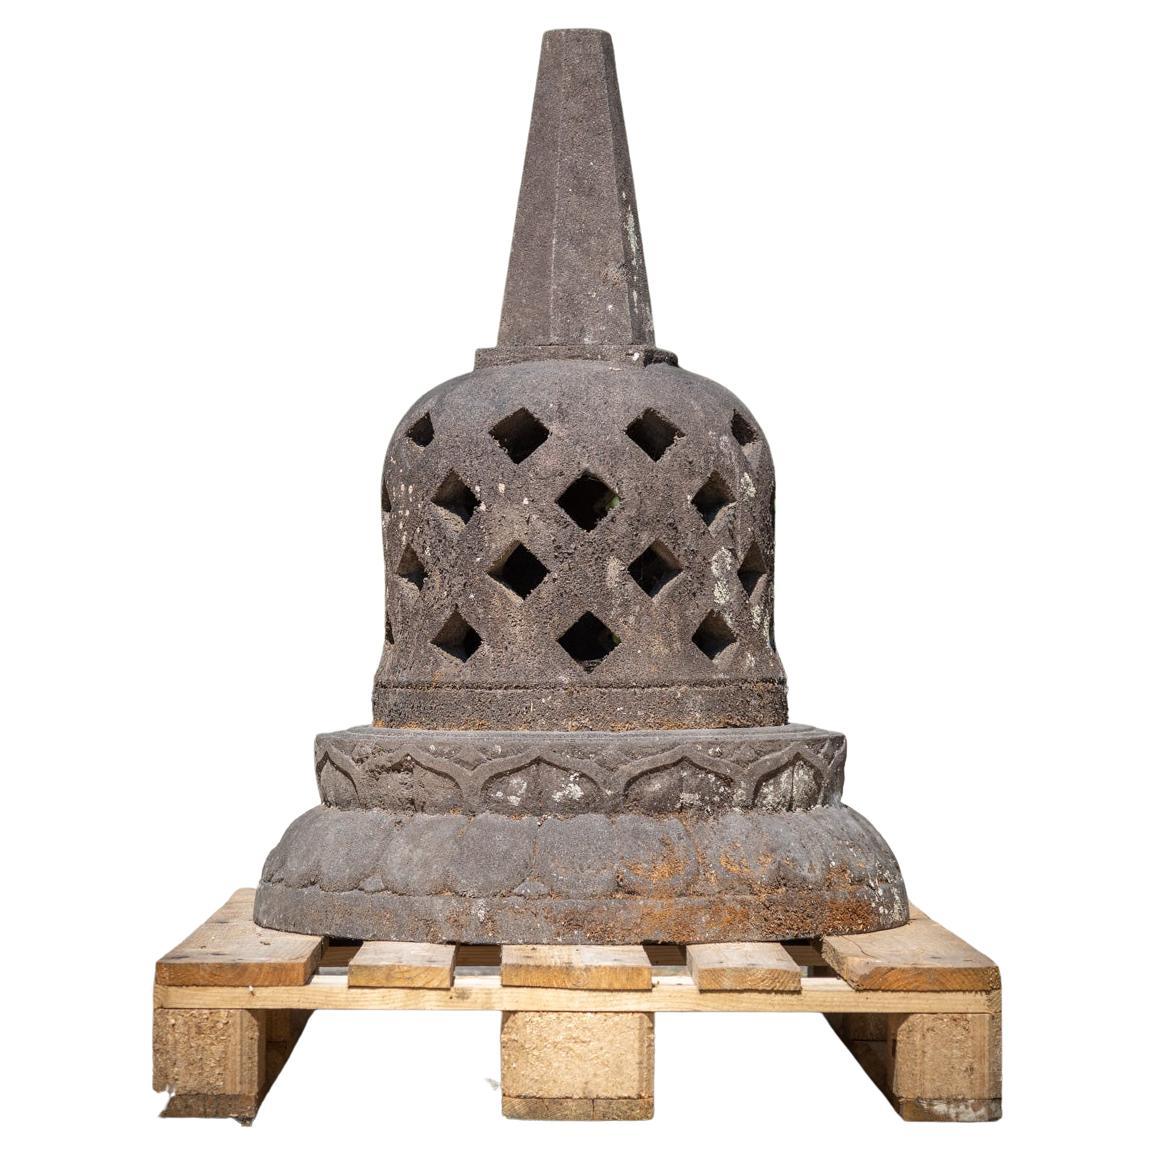 Middle 20th century Old lavastone stupa from Indonesia  OriginalBuddhas For Sale